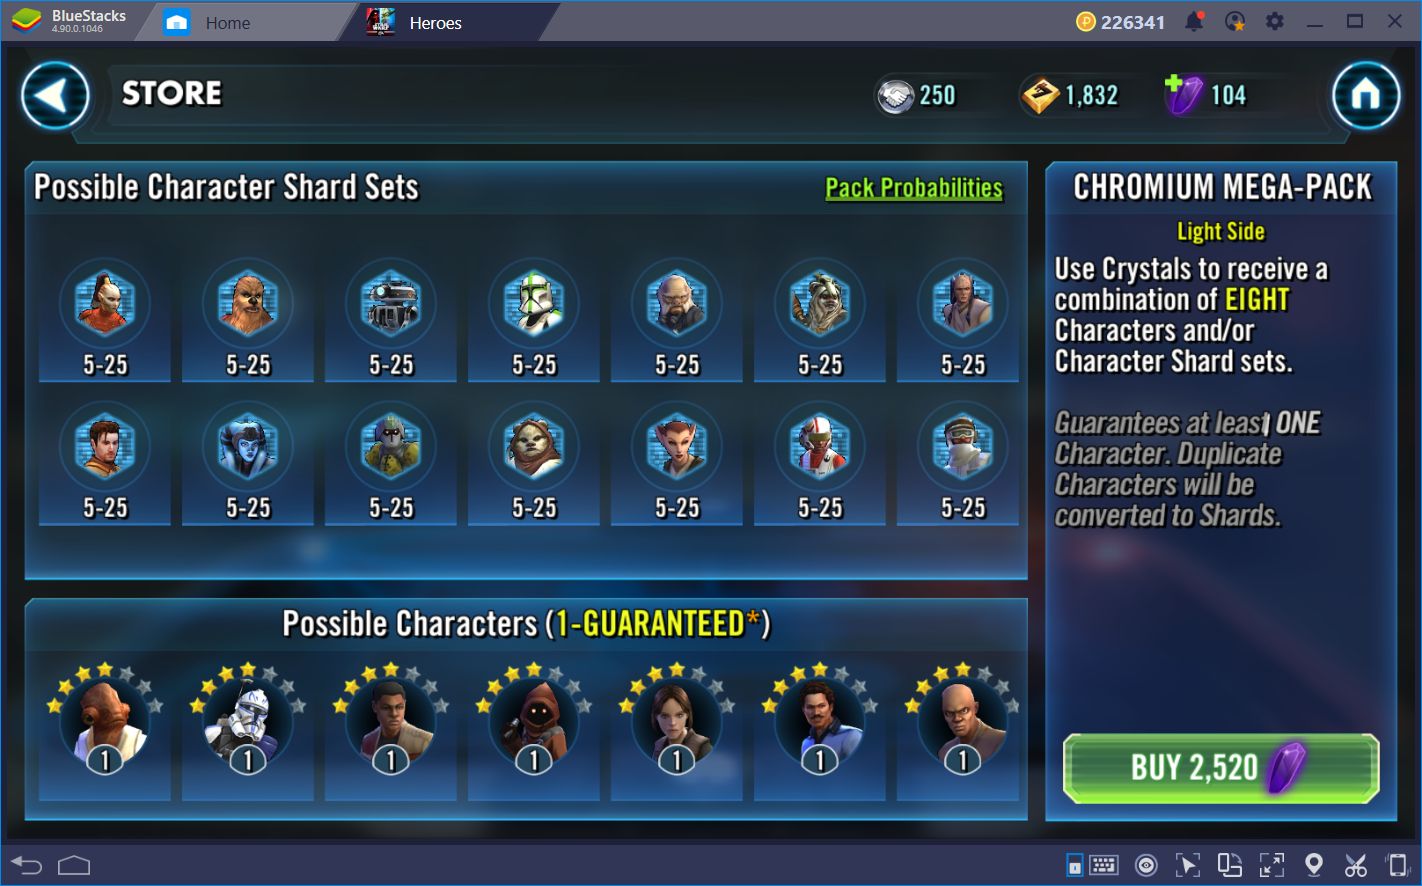 Combat Guide for Star Wars: Galaxy of Heroes